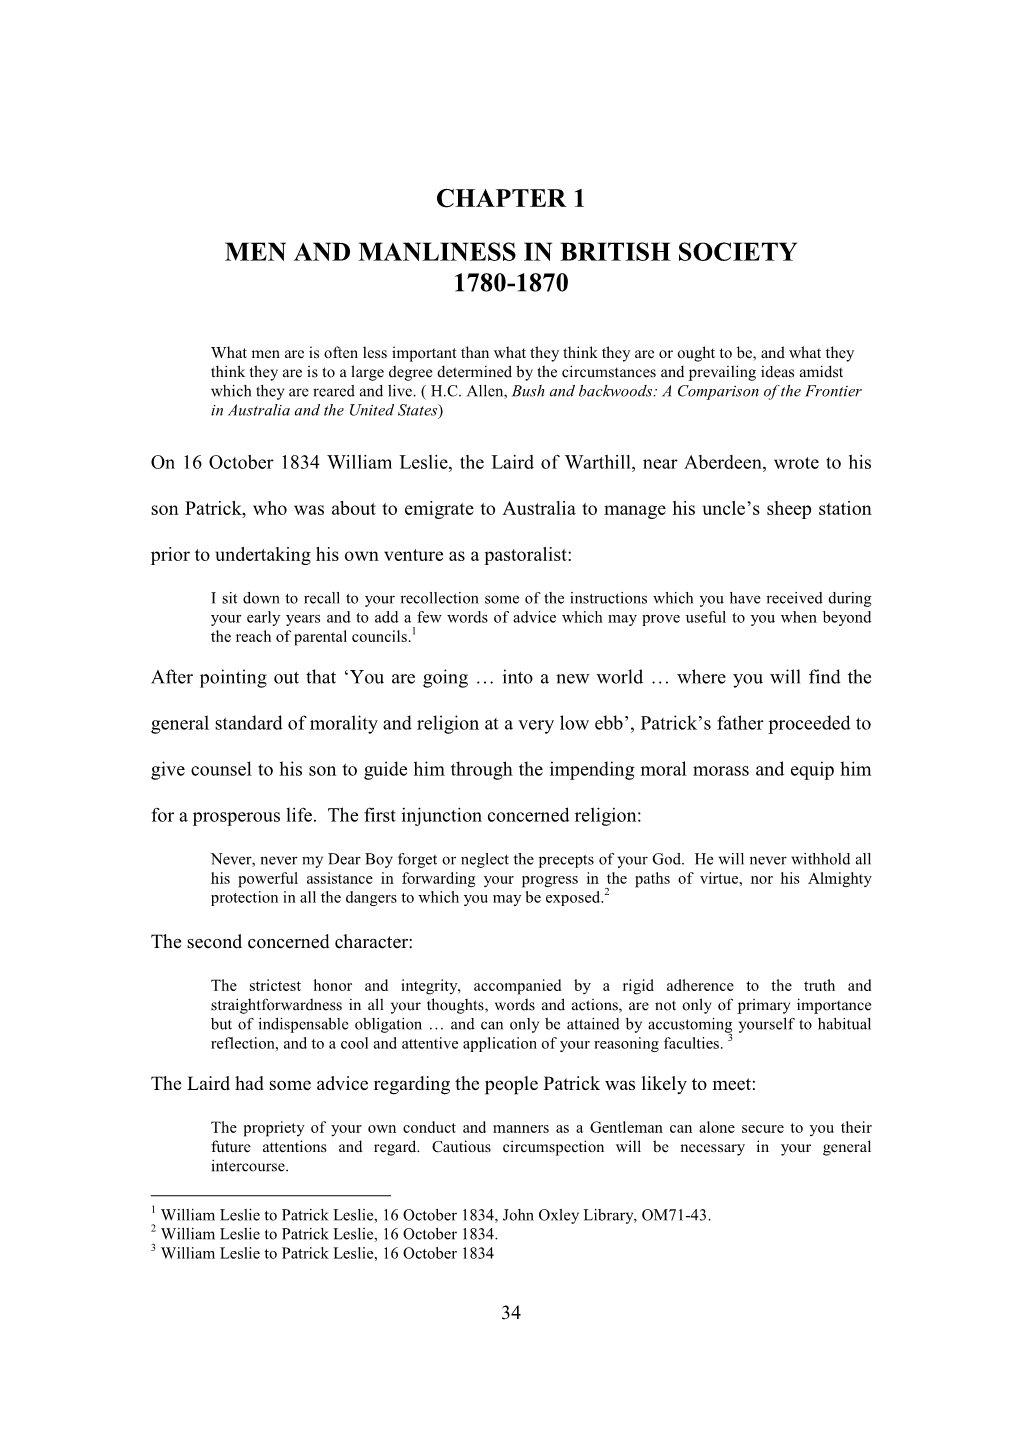 Chapter 1 Men and Manliness in British Society 1780-1870